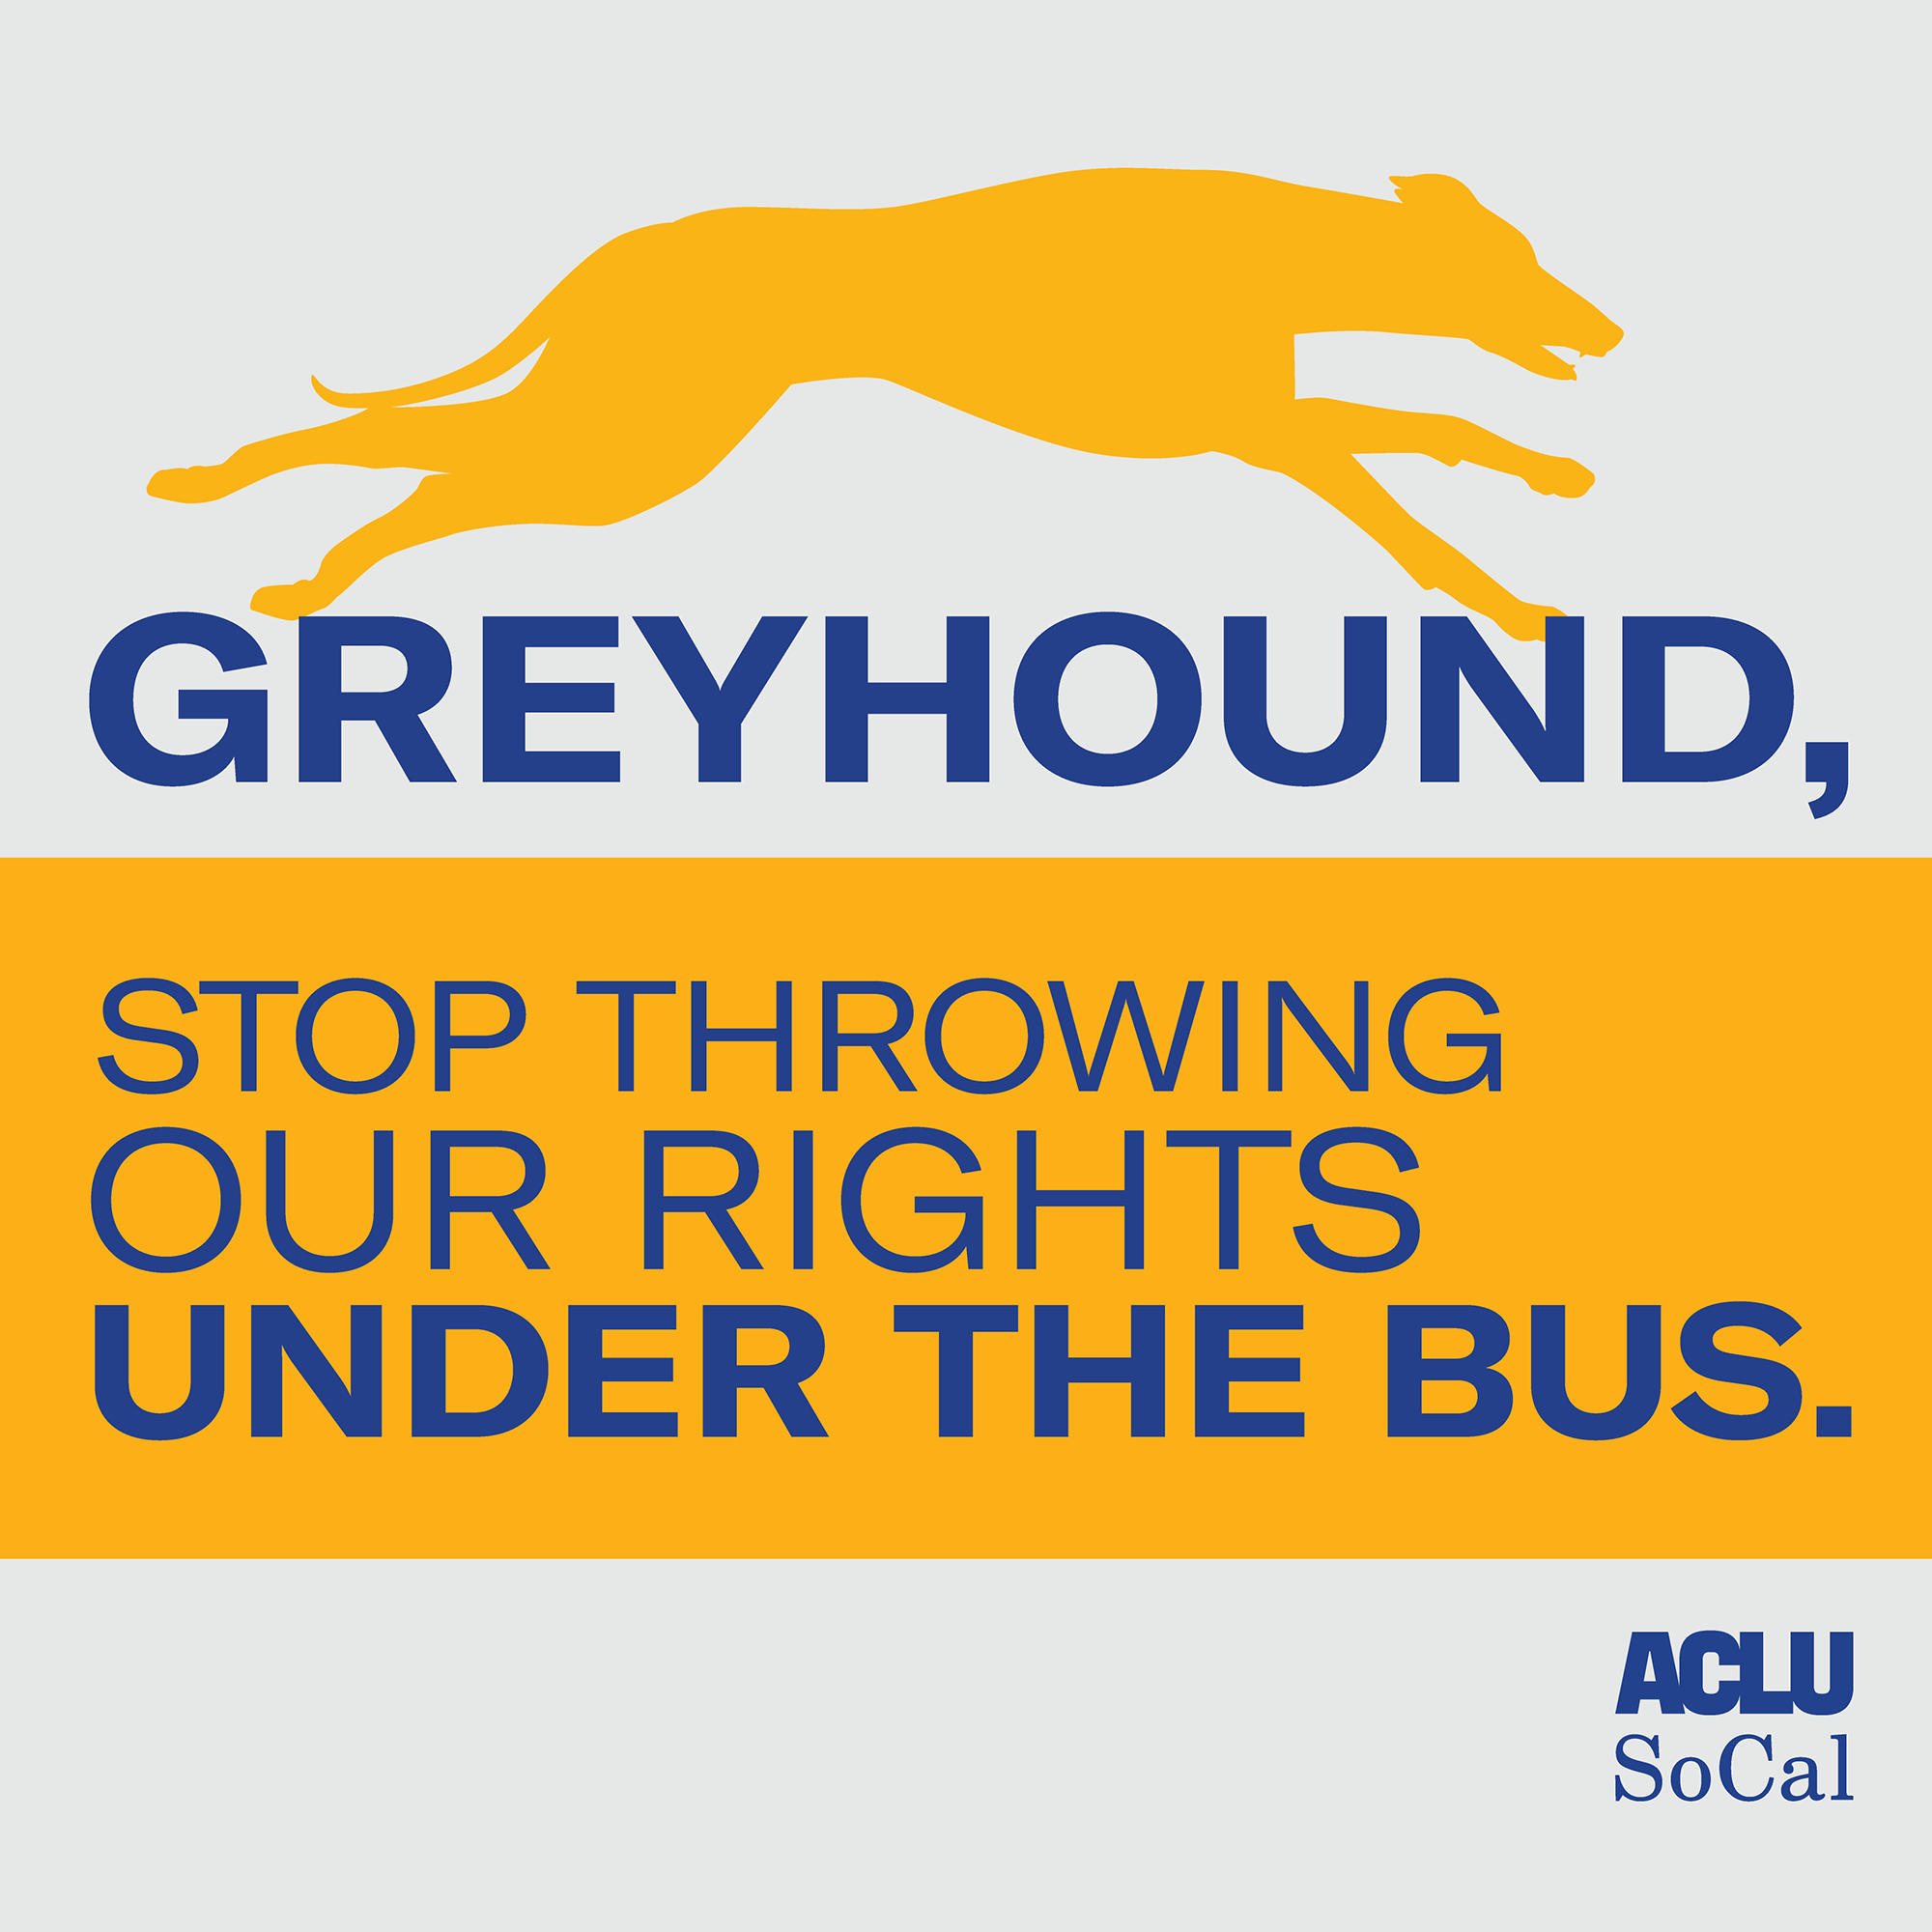 Greyhound, stop throwing our rights under the bus